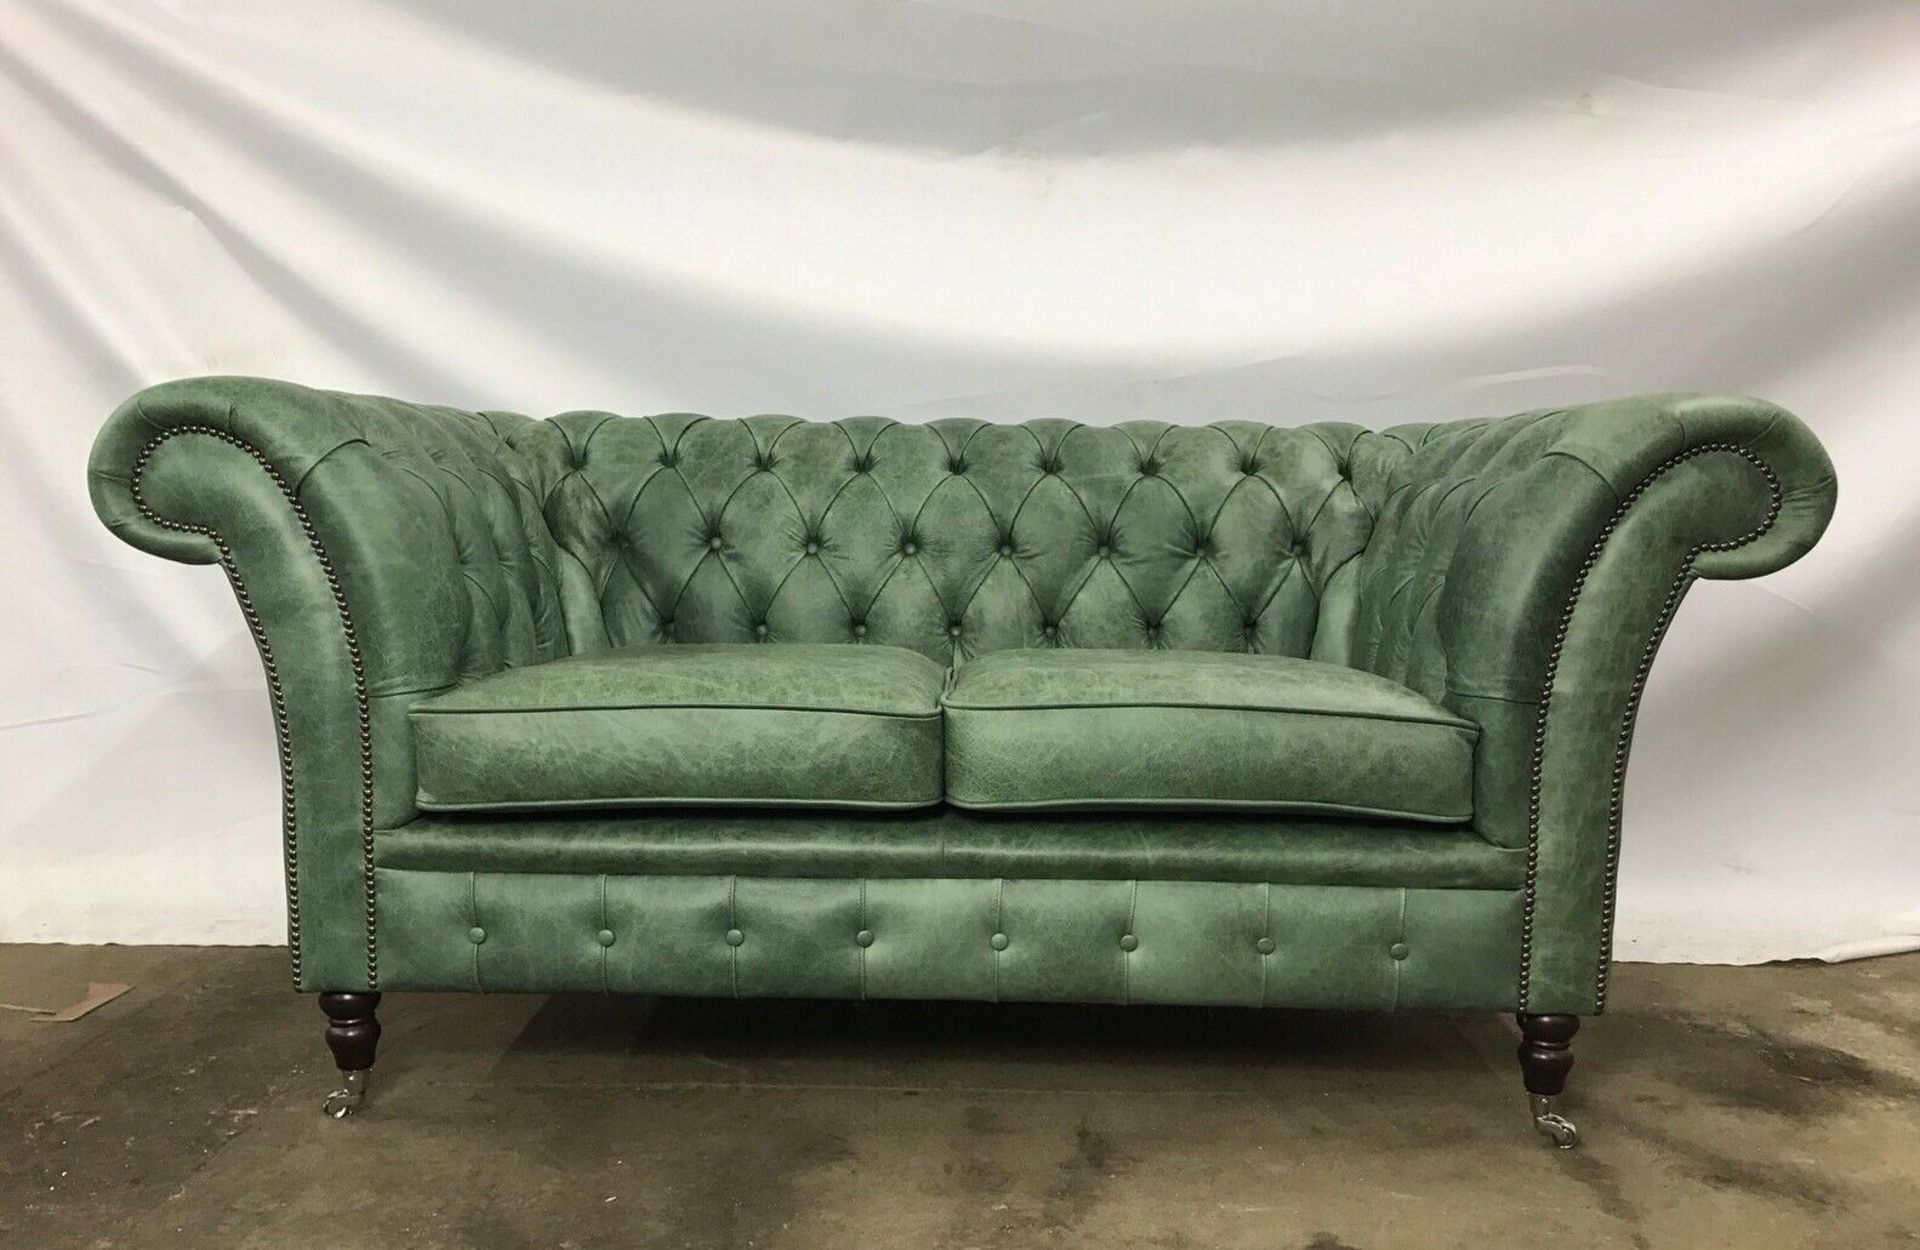 Paris 2 Seater Chesterfield In Selvagio Verde Distressed Leather Beautifully Creative And